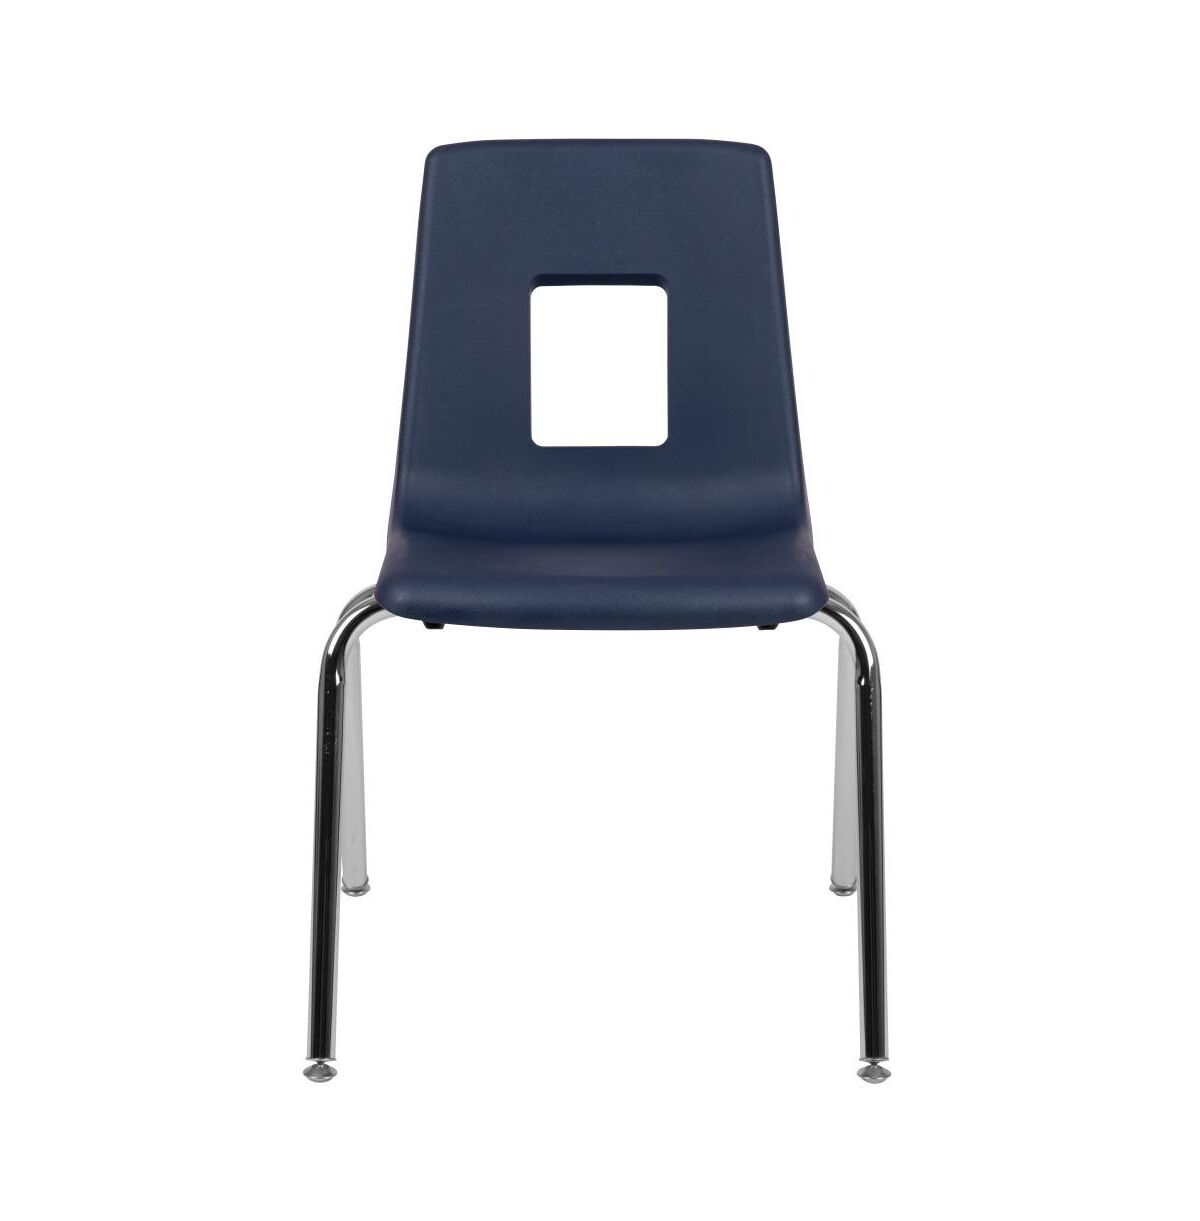 Emma+Oliver 4-Pack Student Stack School Chair - 18-Inch - Navy